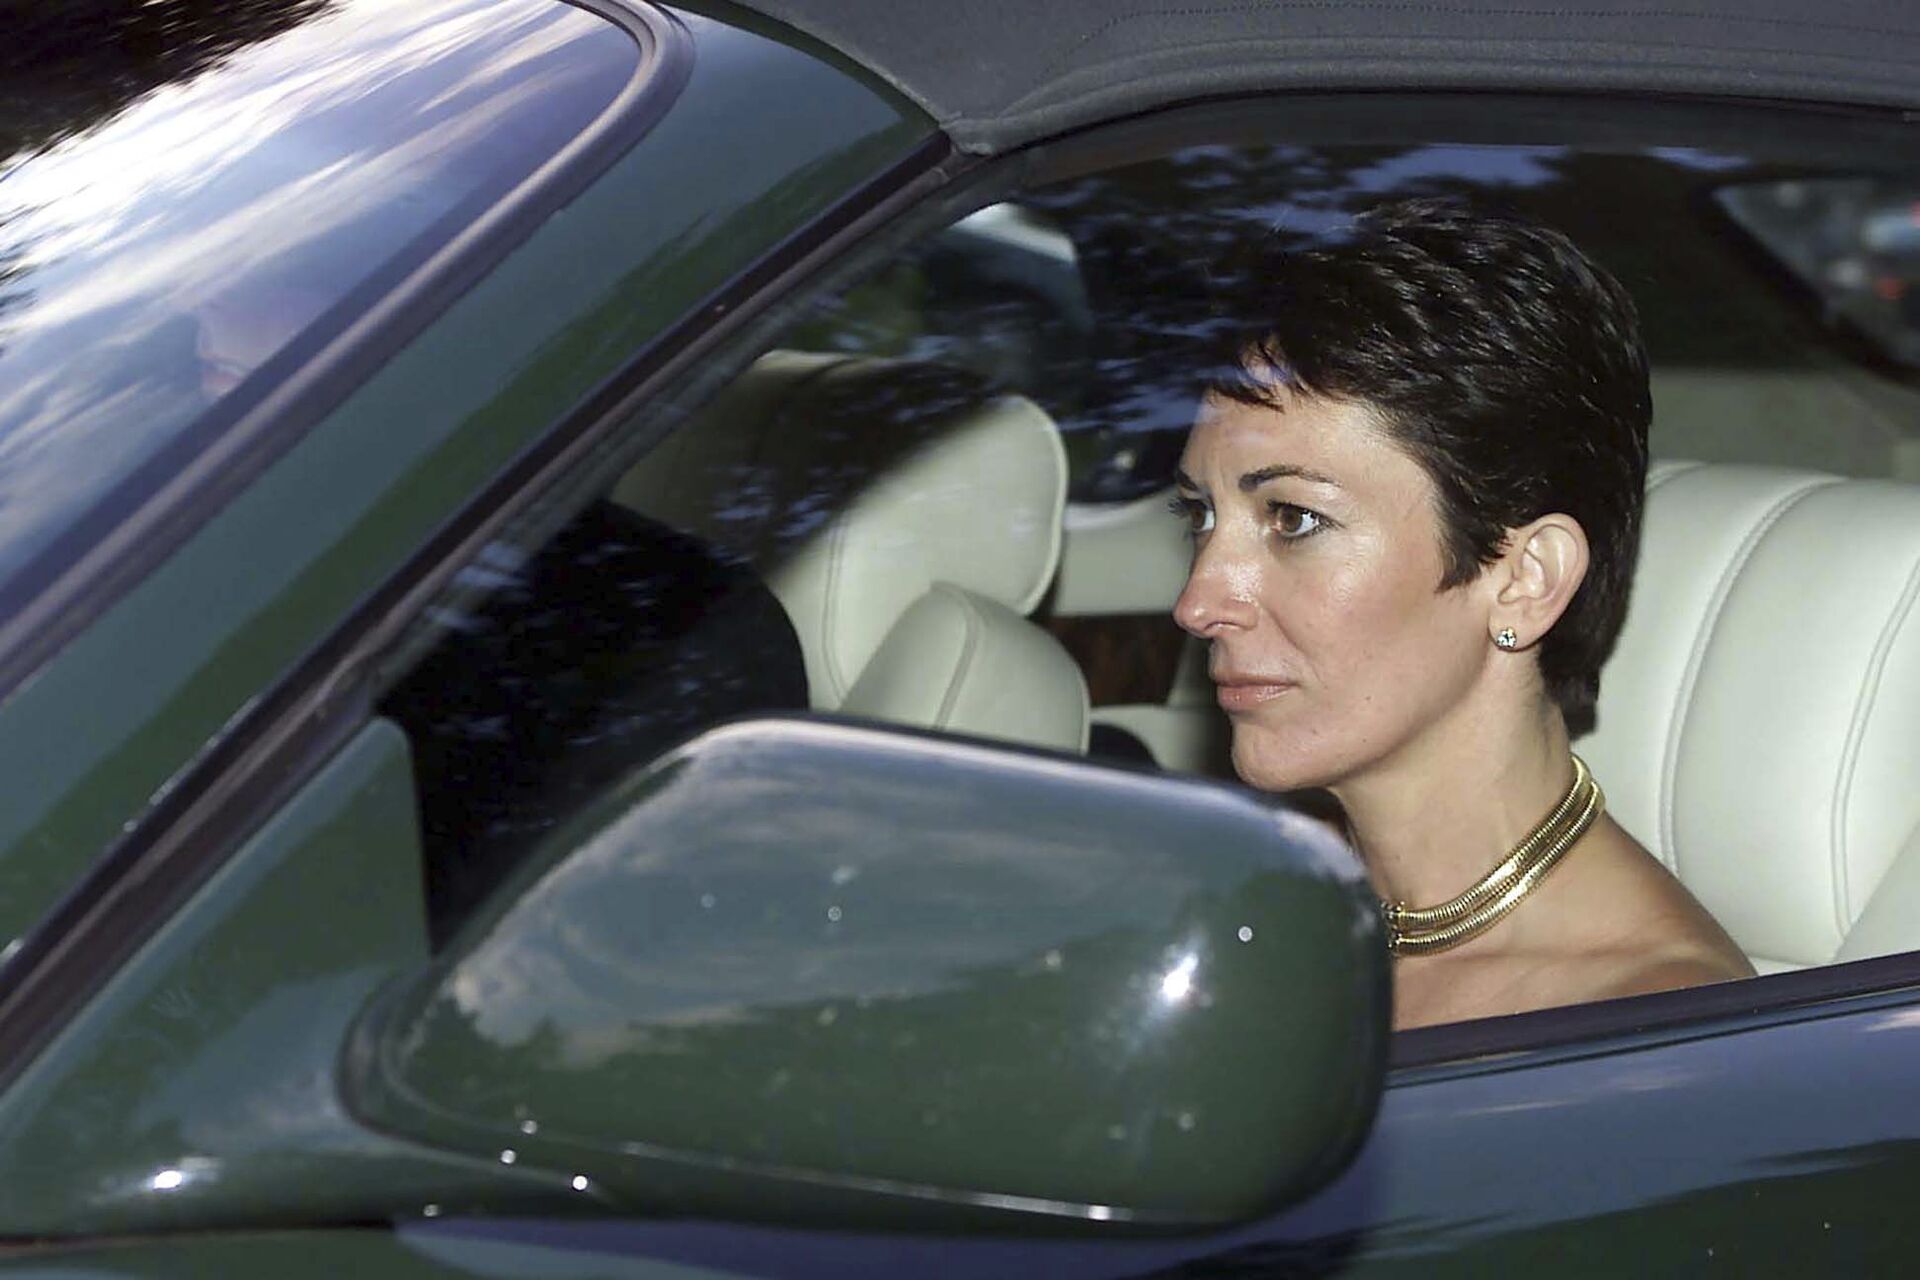 FILE - In this Sept. 2, 2000 file photo, British socialite Ghislaine Maxwell, driven by Britain's Prince Andrew leaves the wedding of a former girlfriend of the prince, Aurelia Cecil, at the Parish Church of St Michael in Compton Chamberlayne near Salisbury, England. The FBI said Thursday July 2, 2020, Ghislaine Maxwell, who was accused by many women of helping procure underage sex partners for Jeffrey Epstein, has been arrested in New Hampshire. - Sputnik International, 1920, 07.09.2021